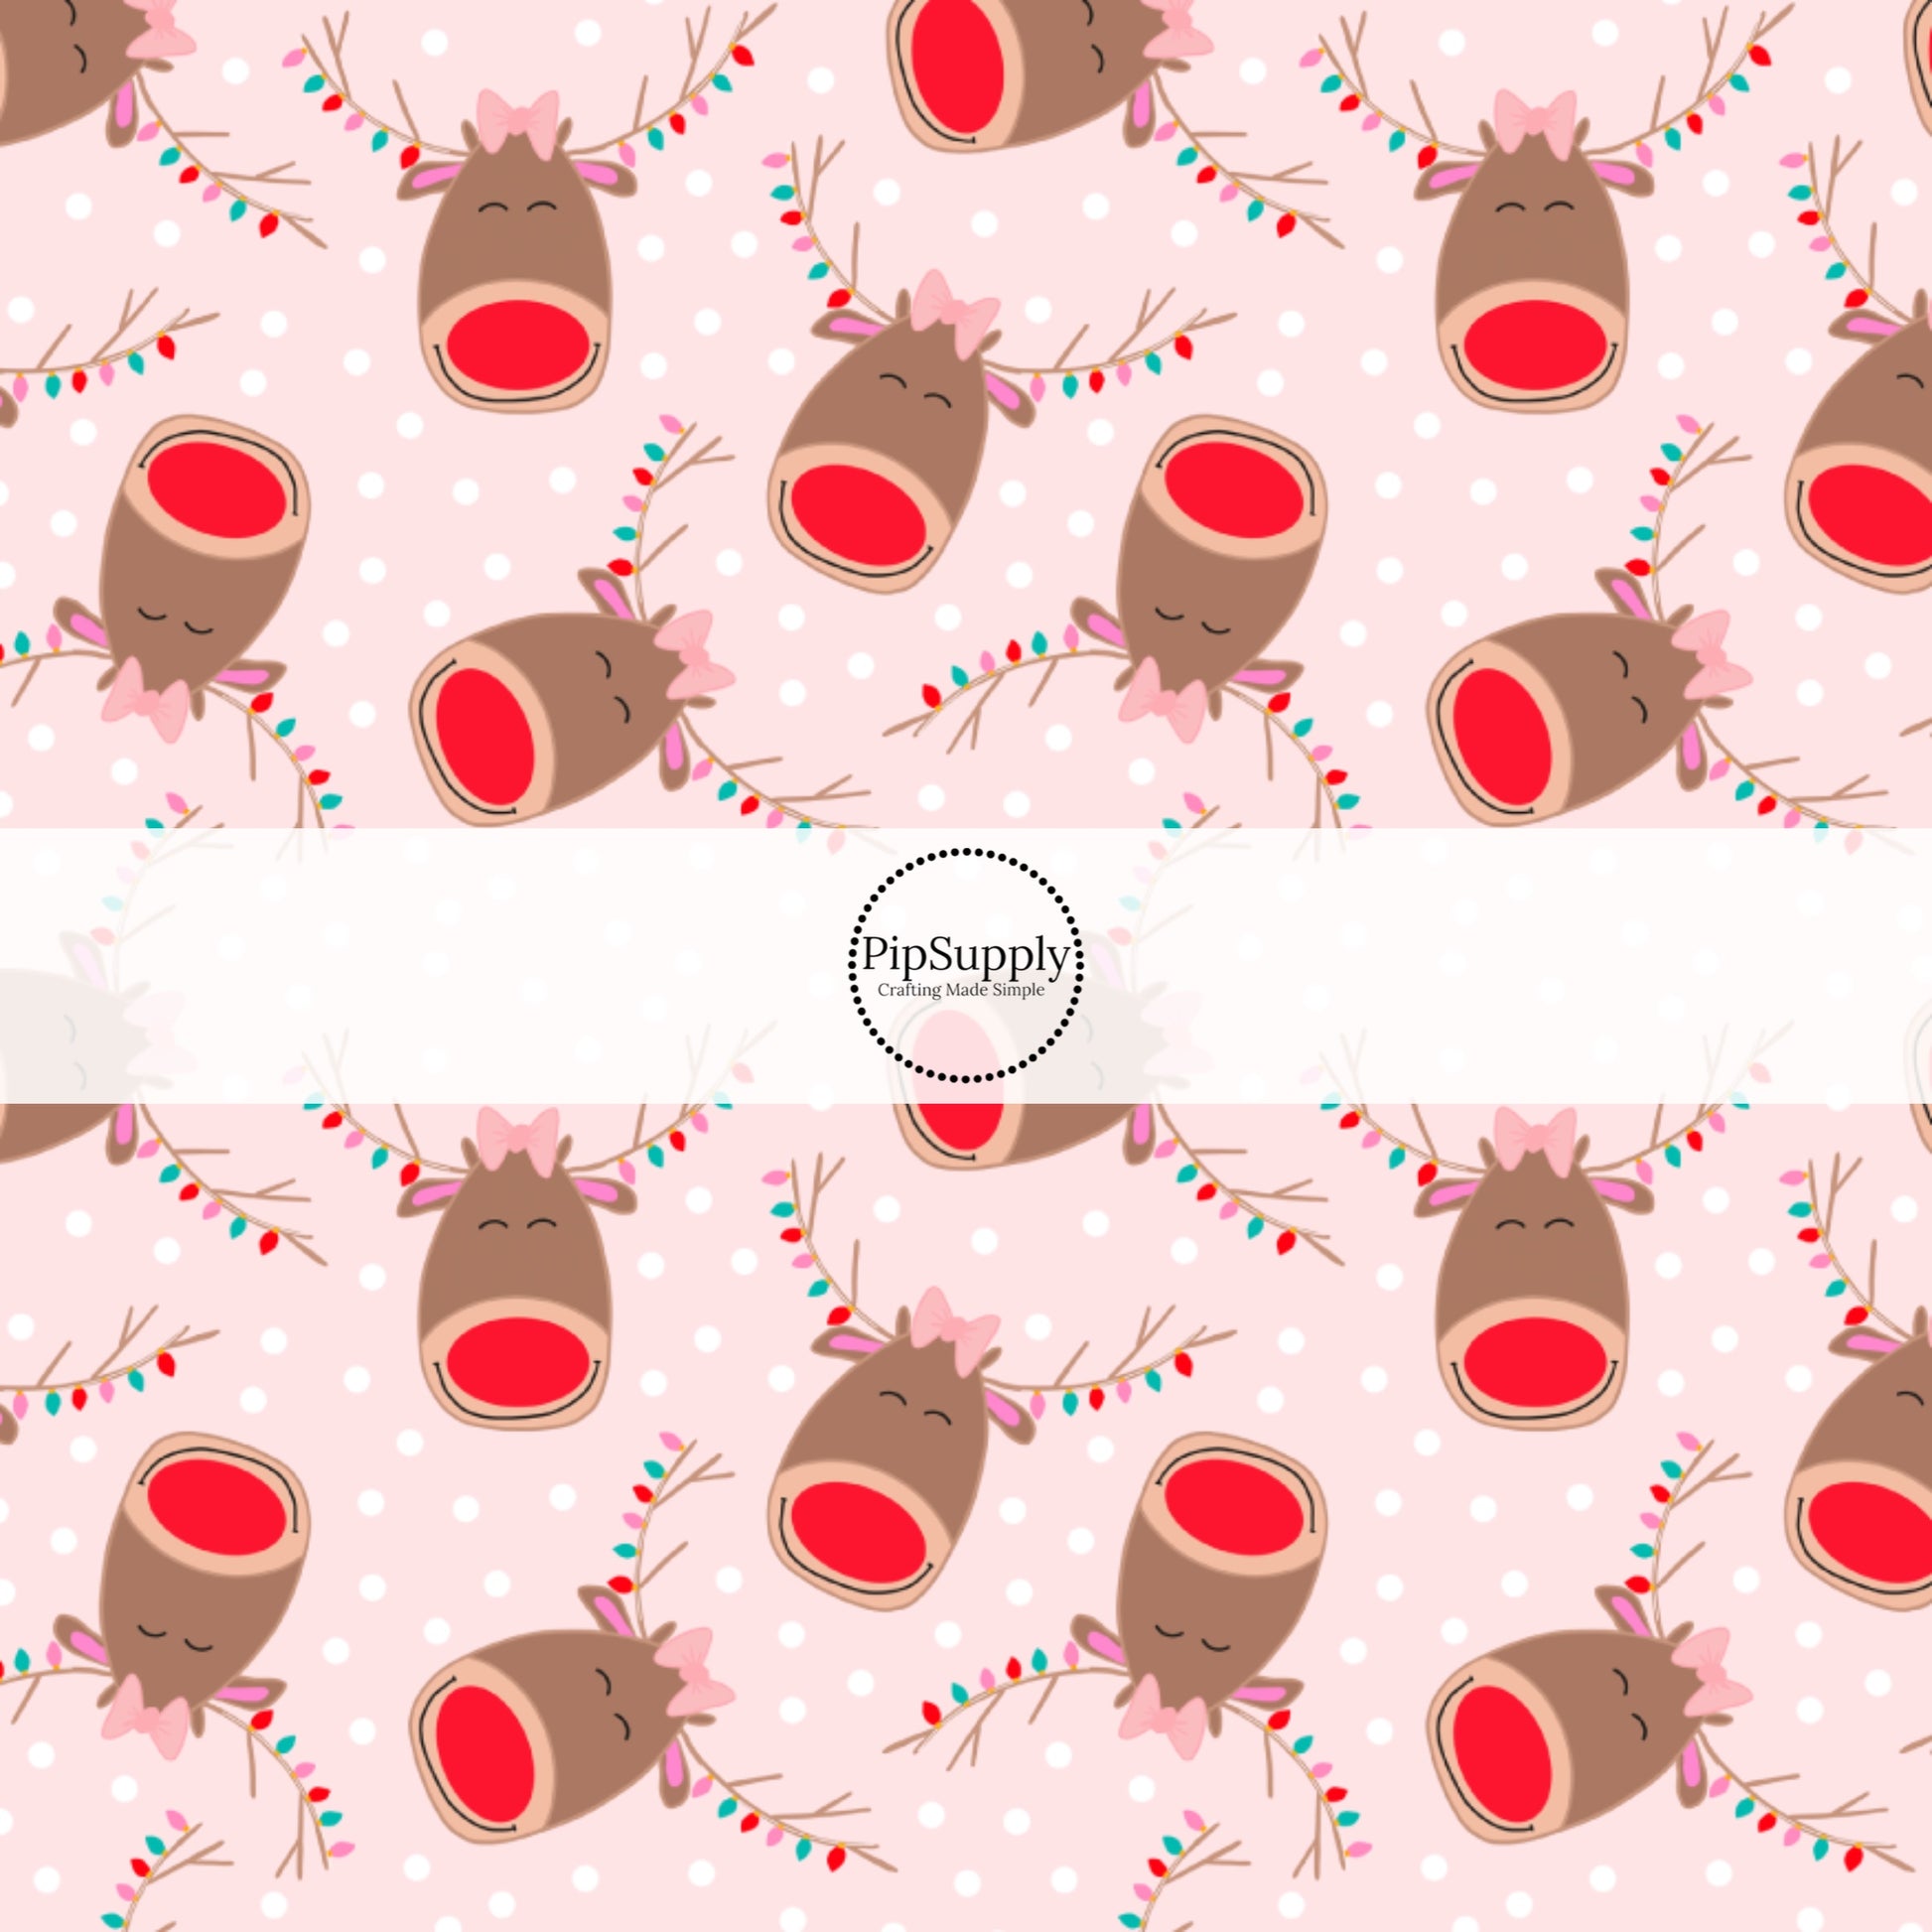 These holiday pattern themed fabric by the yard features reindeer with Christmas lights on light pink with small white dots. This fun Christmas fabric can be used for all your sewing and crafting needs!